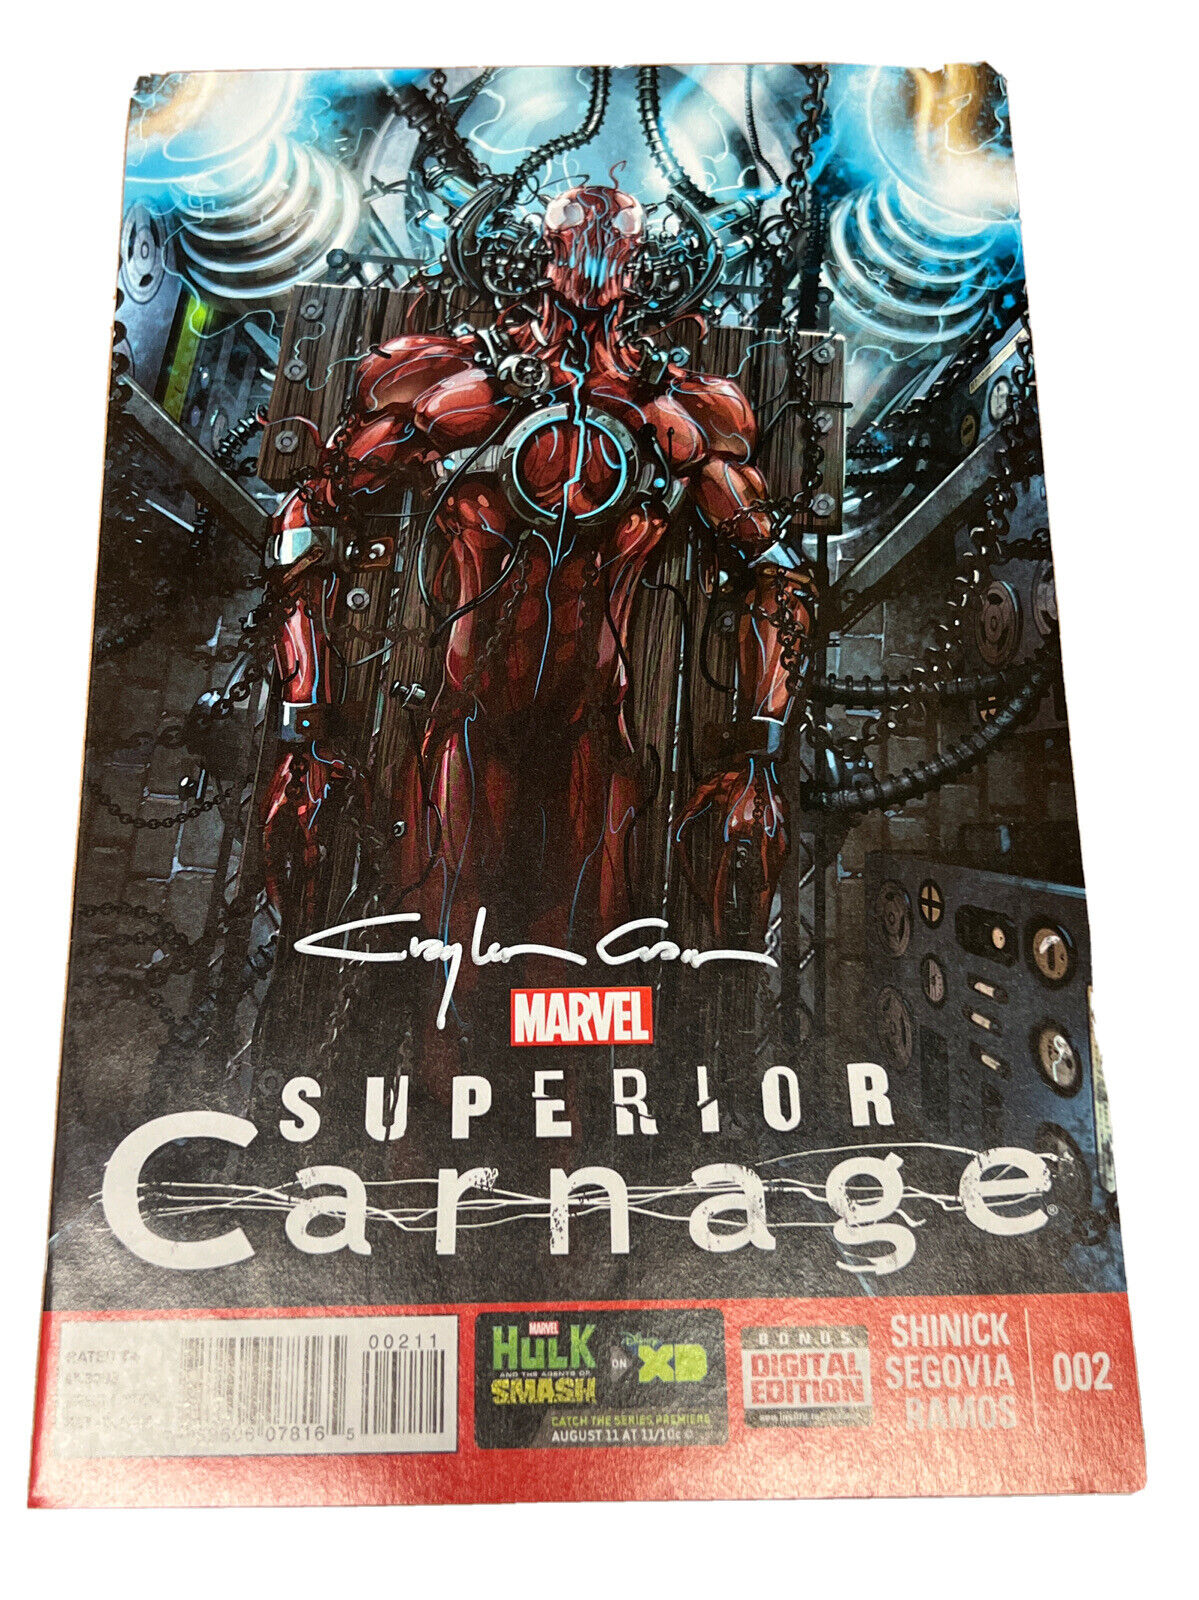 SUPERIOR CARNAGE (2013) #2 SIGNED BY CLAYTON CRAIN 1ST PRINT MARVEL COMICS SDCC